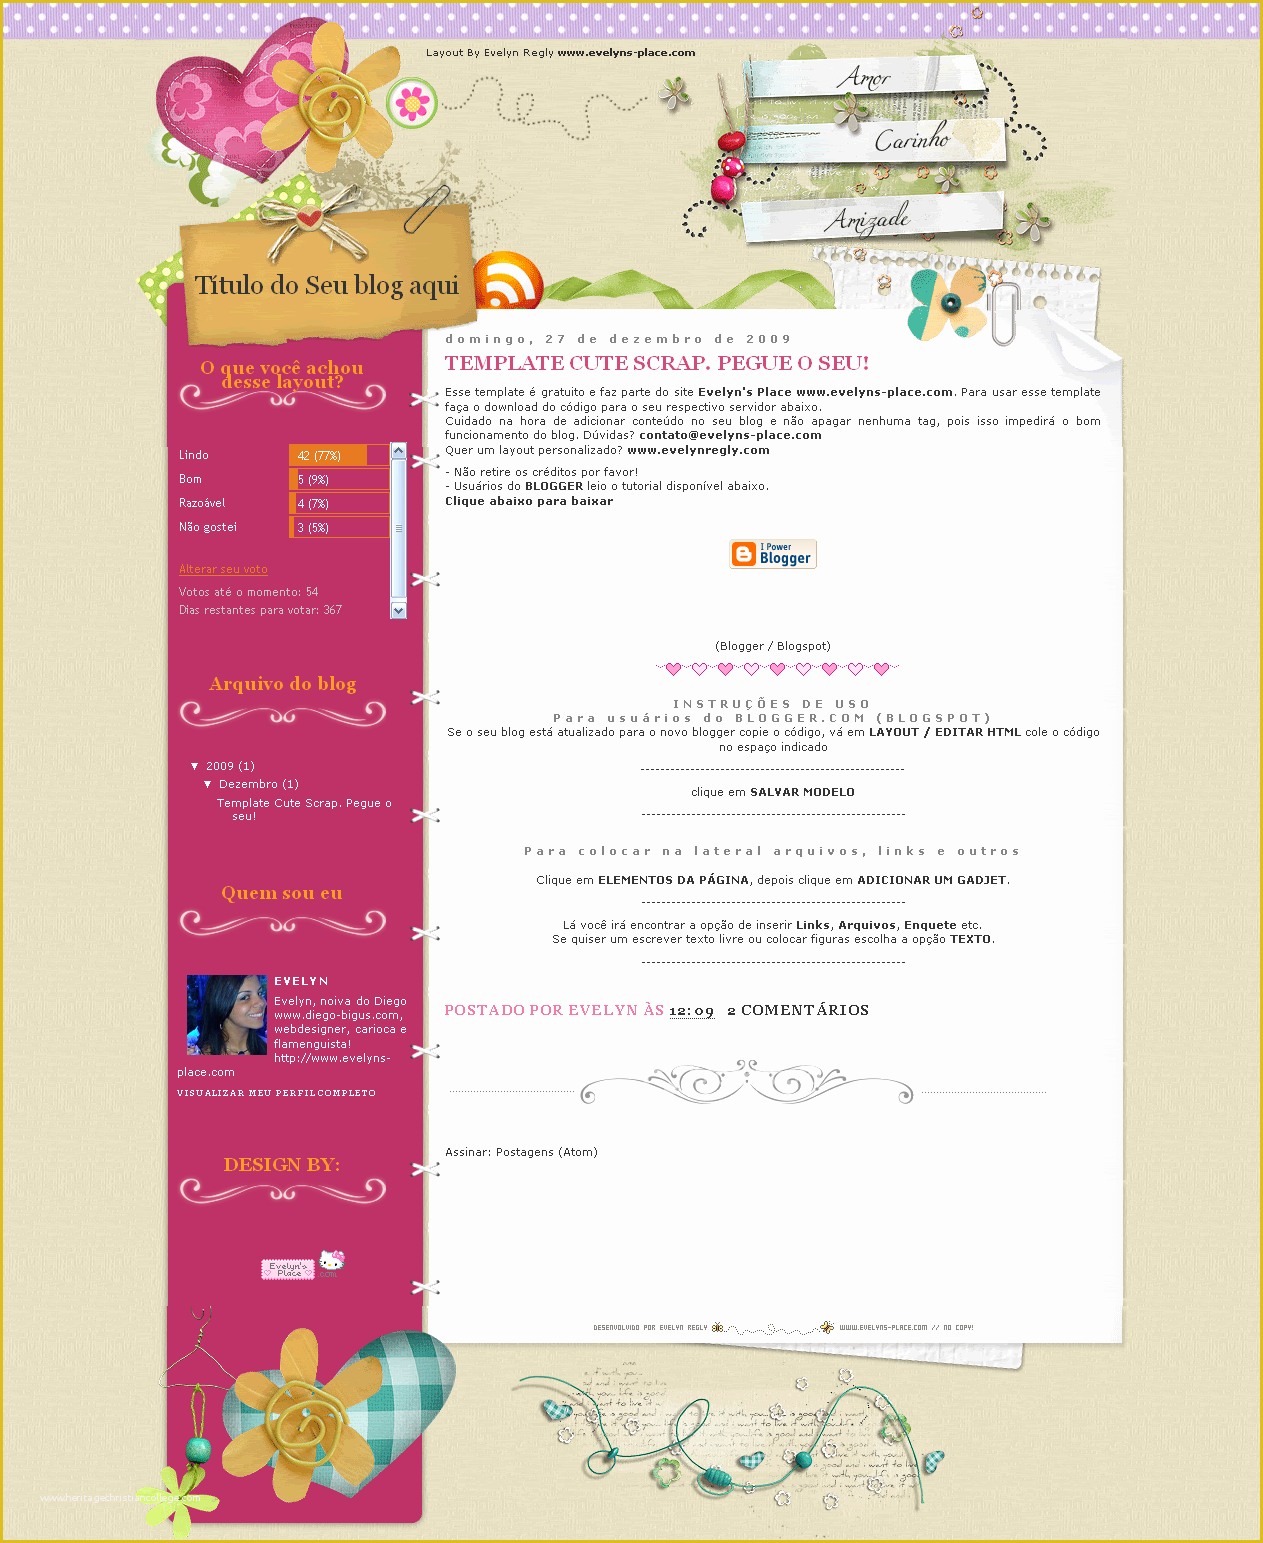 Free Cute Blogger Templates Of Cute Srap Free Layout Blogger by Evelynregly On Deviantart